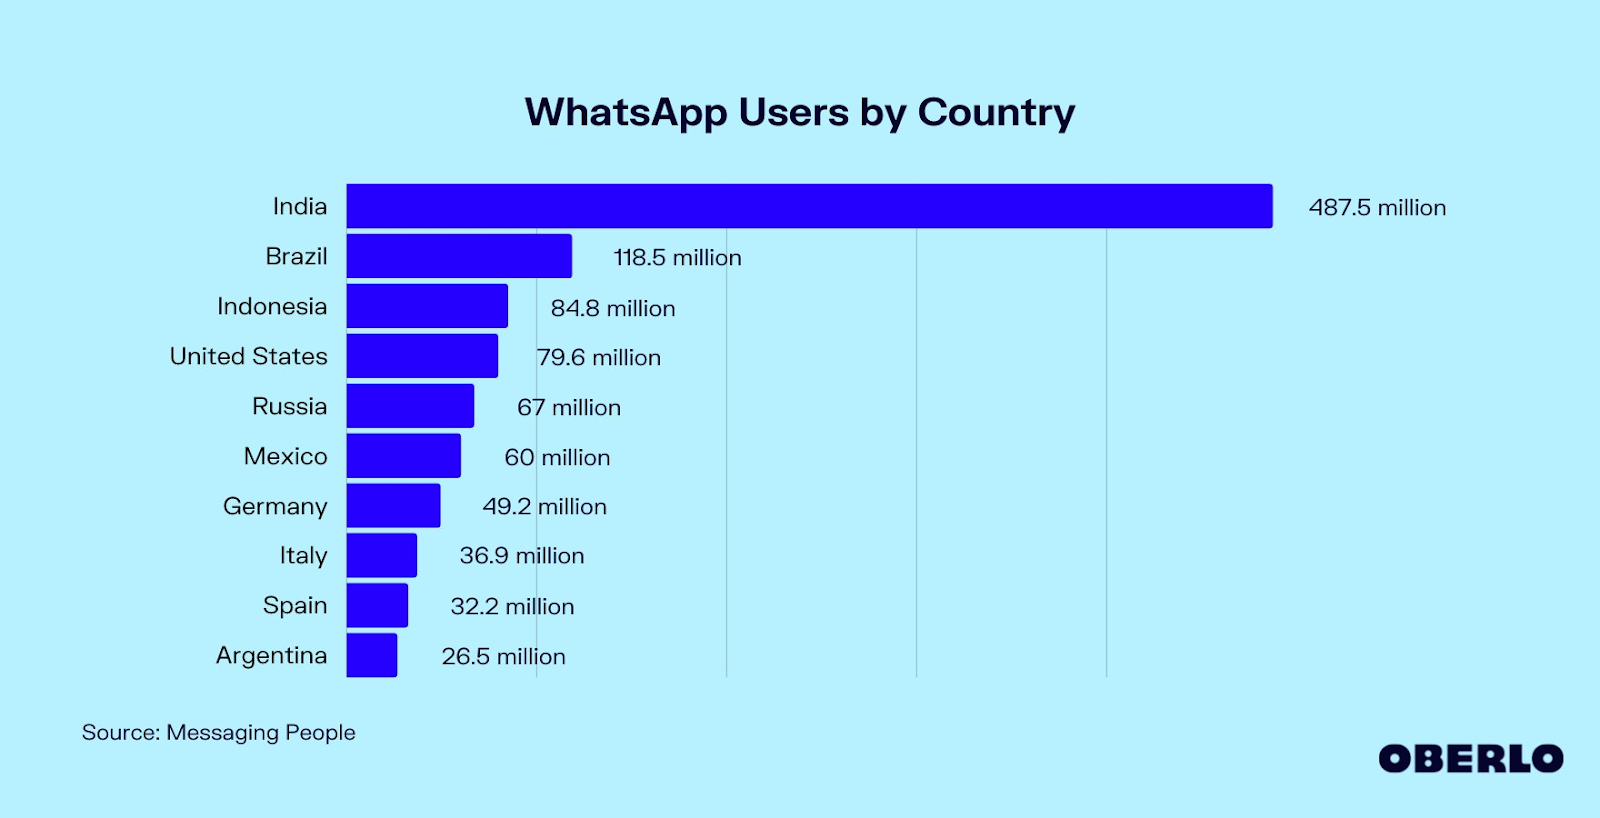 Usage of WhatsApp by Country